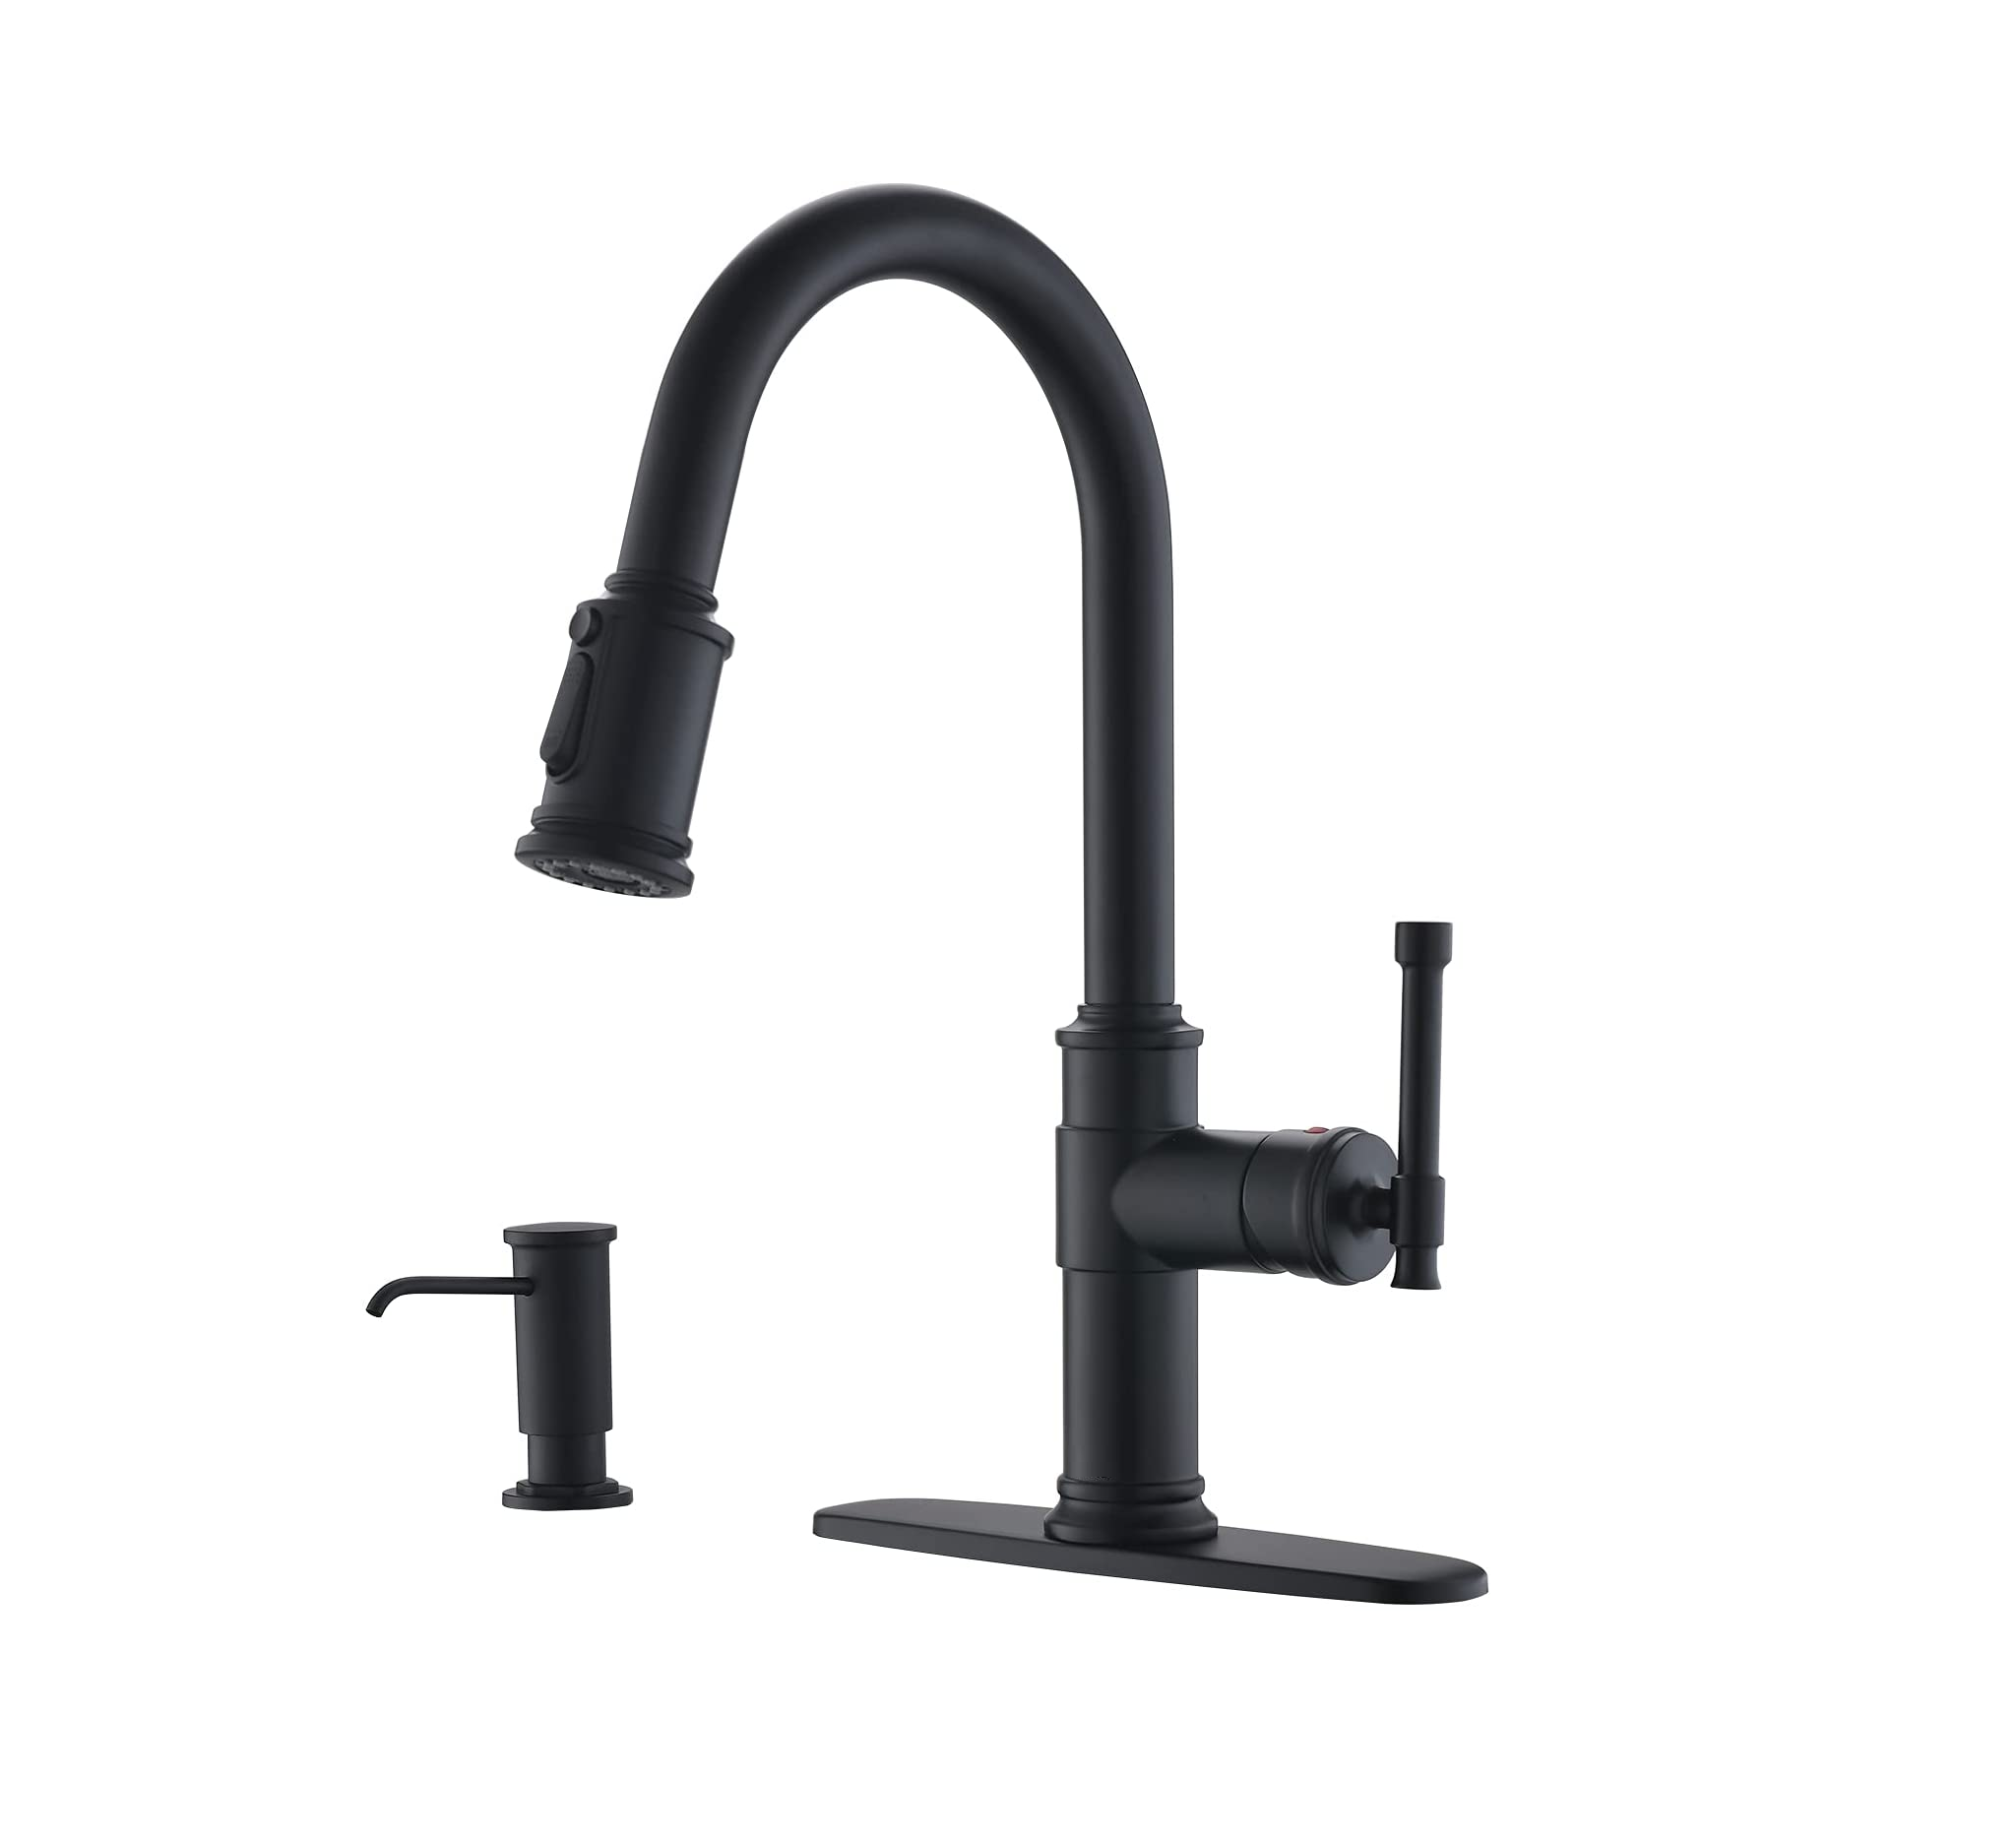 Comercial Kitchen Faucet Pull Down Kitchen Sink Faucet Sink Mixer Kitchen Faucet